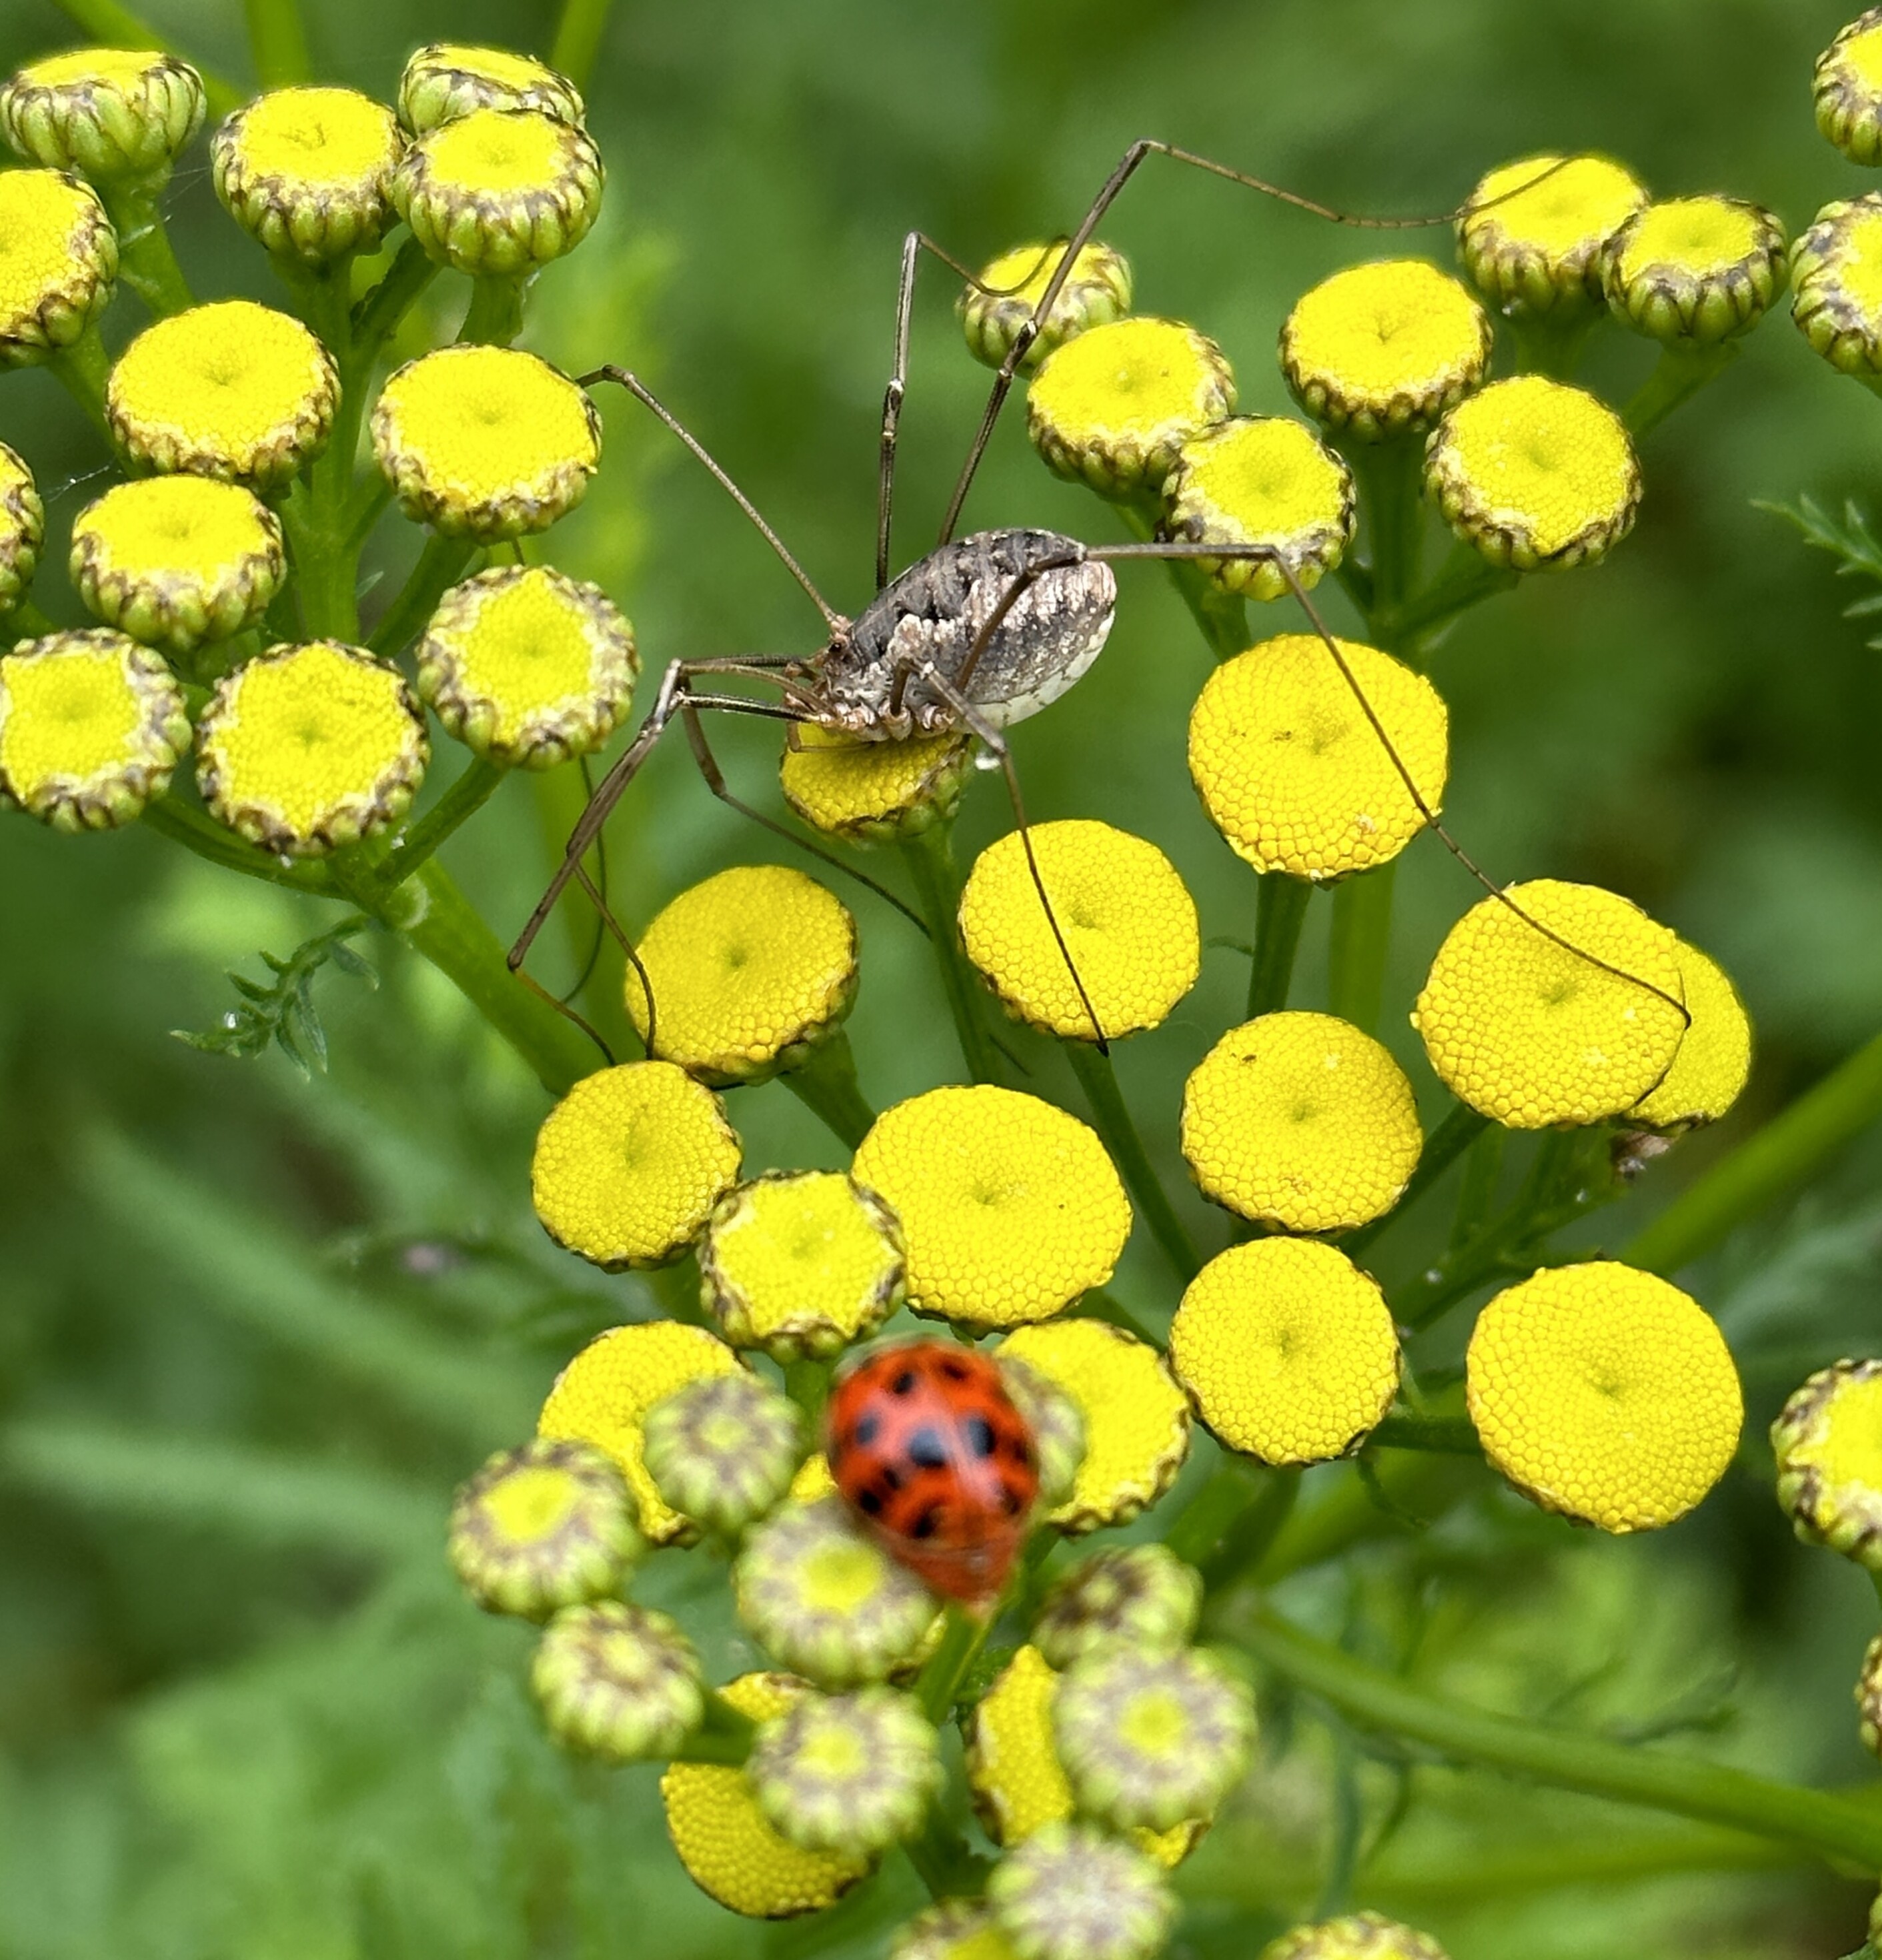 Spider and lady bug drama on top of a sea of small yellow flower buds